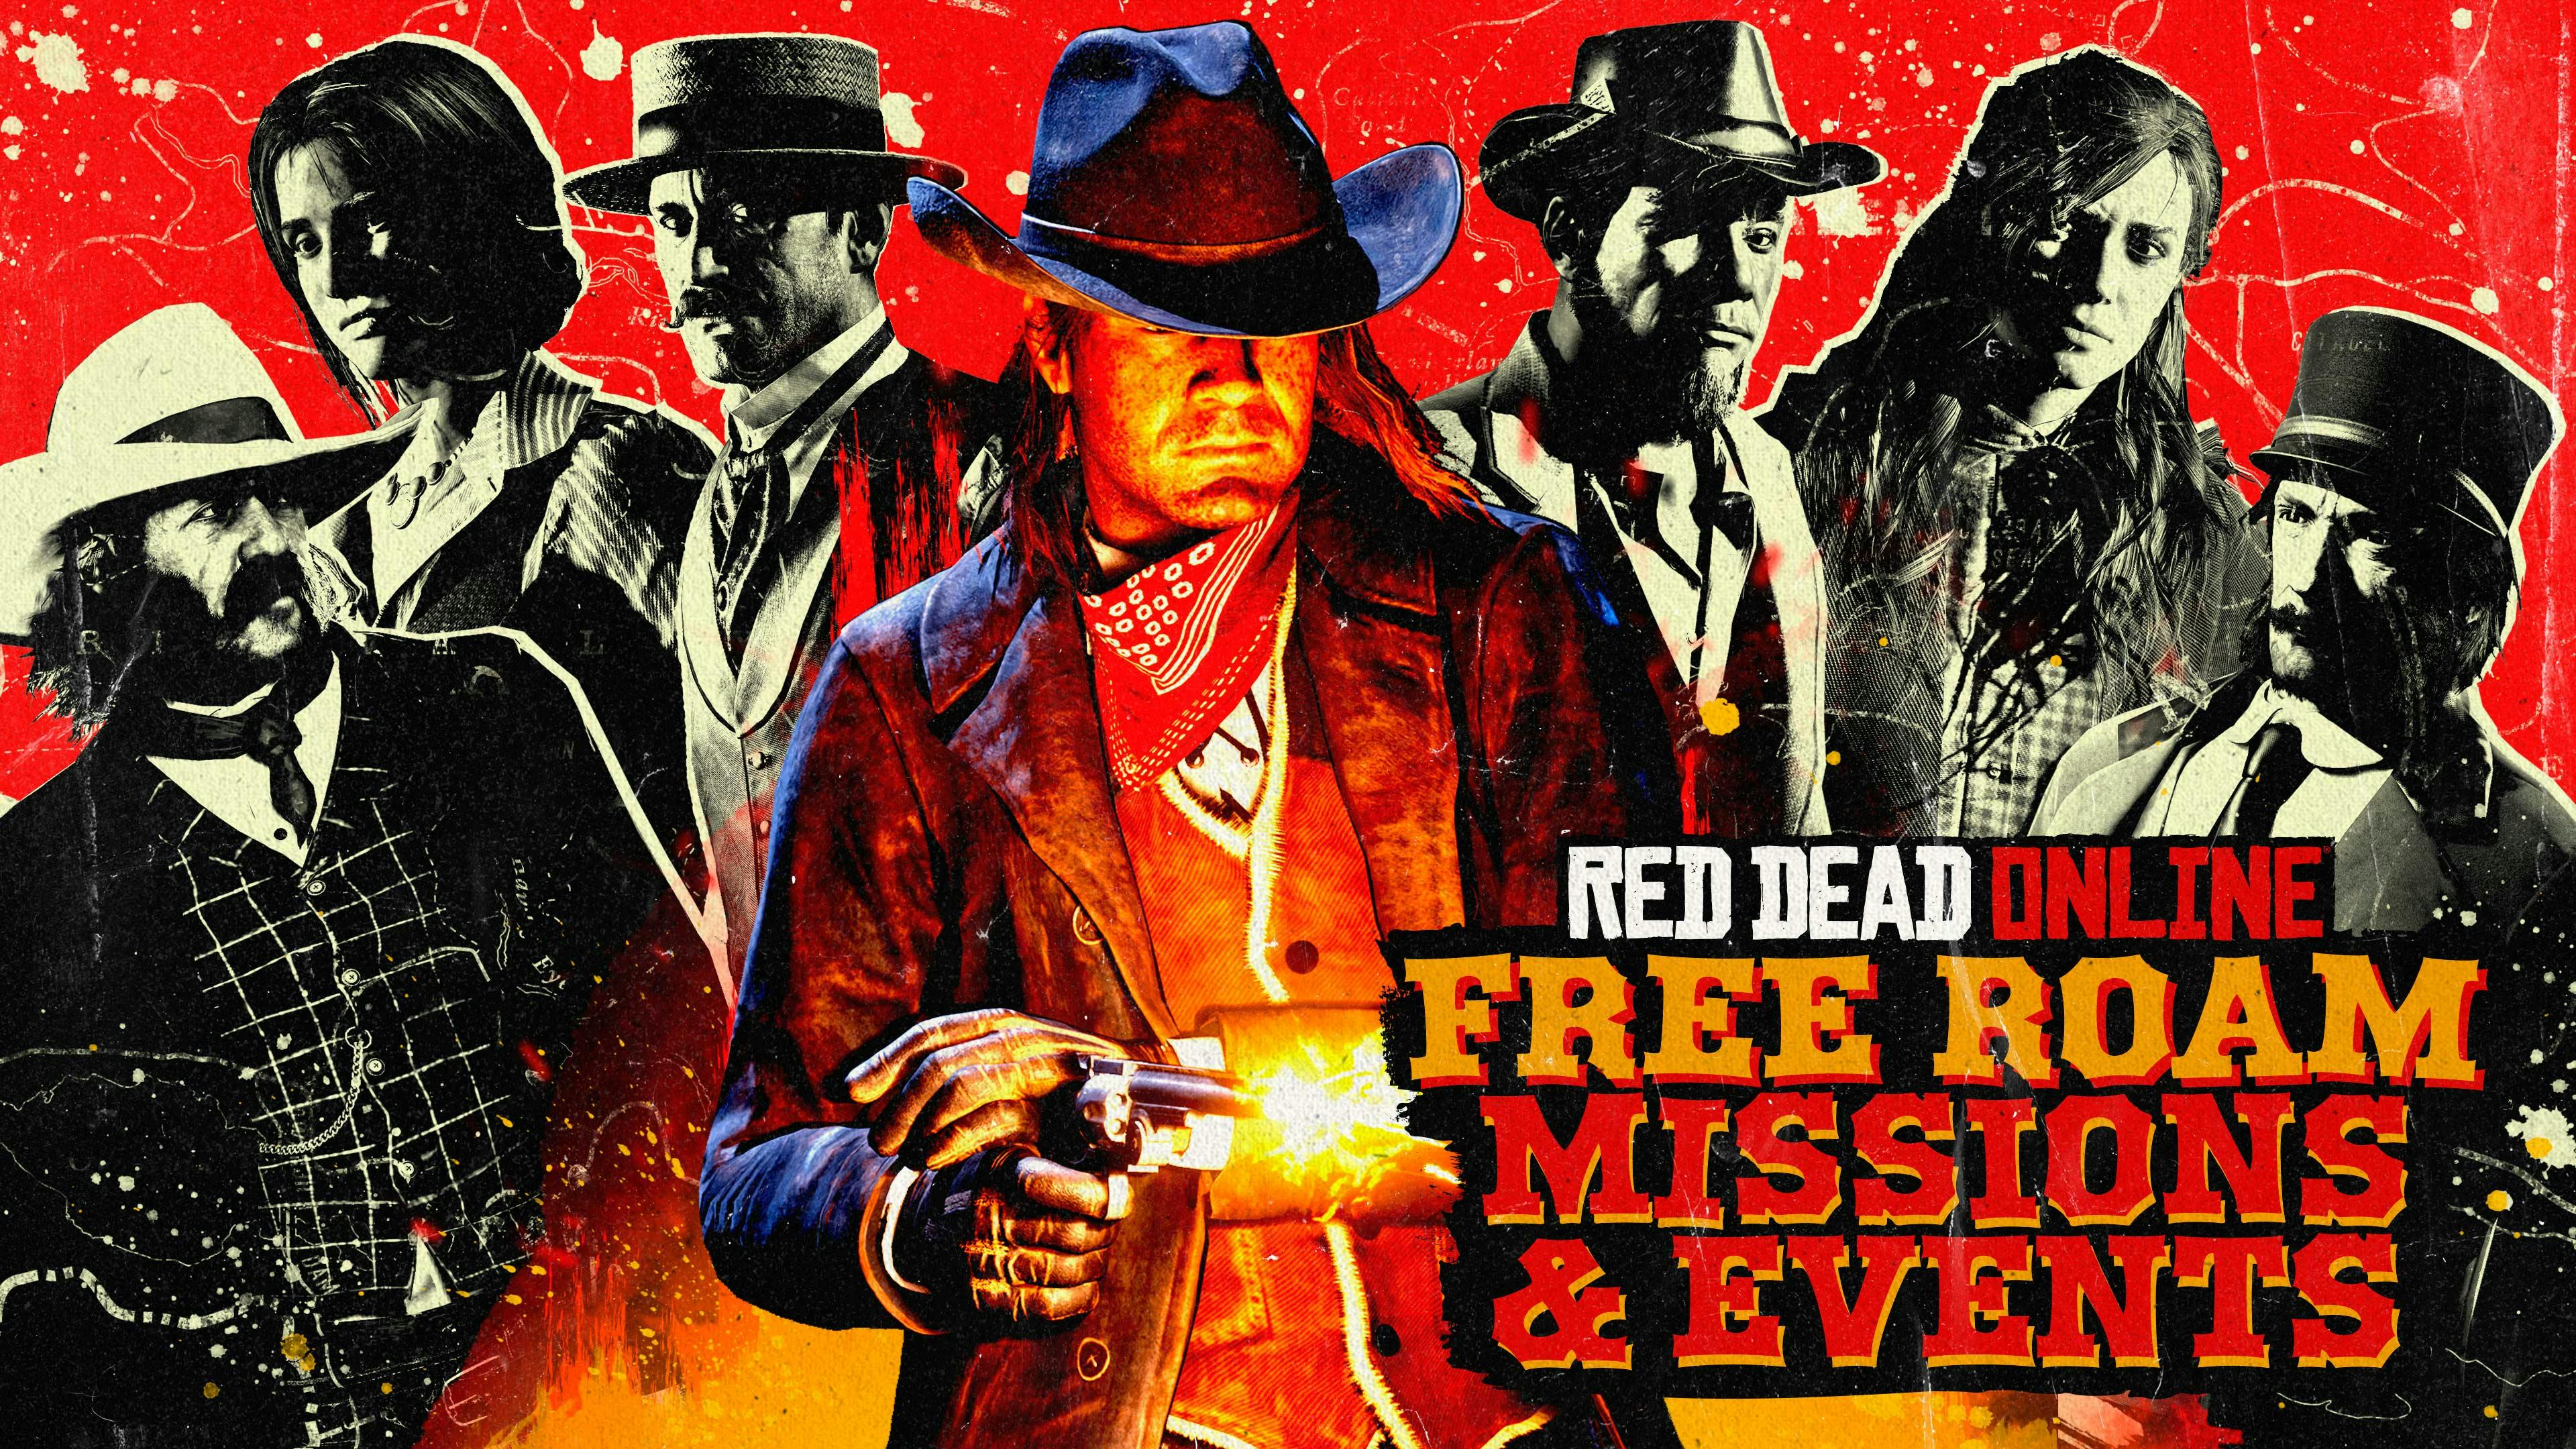 Free Roam Missions and Events in Red Dead Online